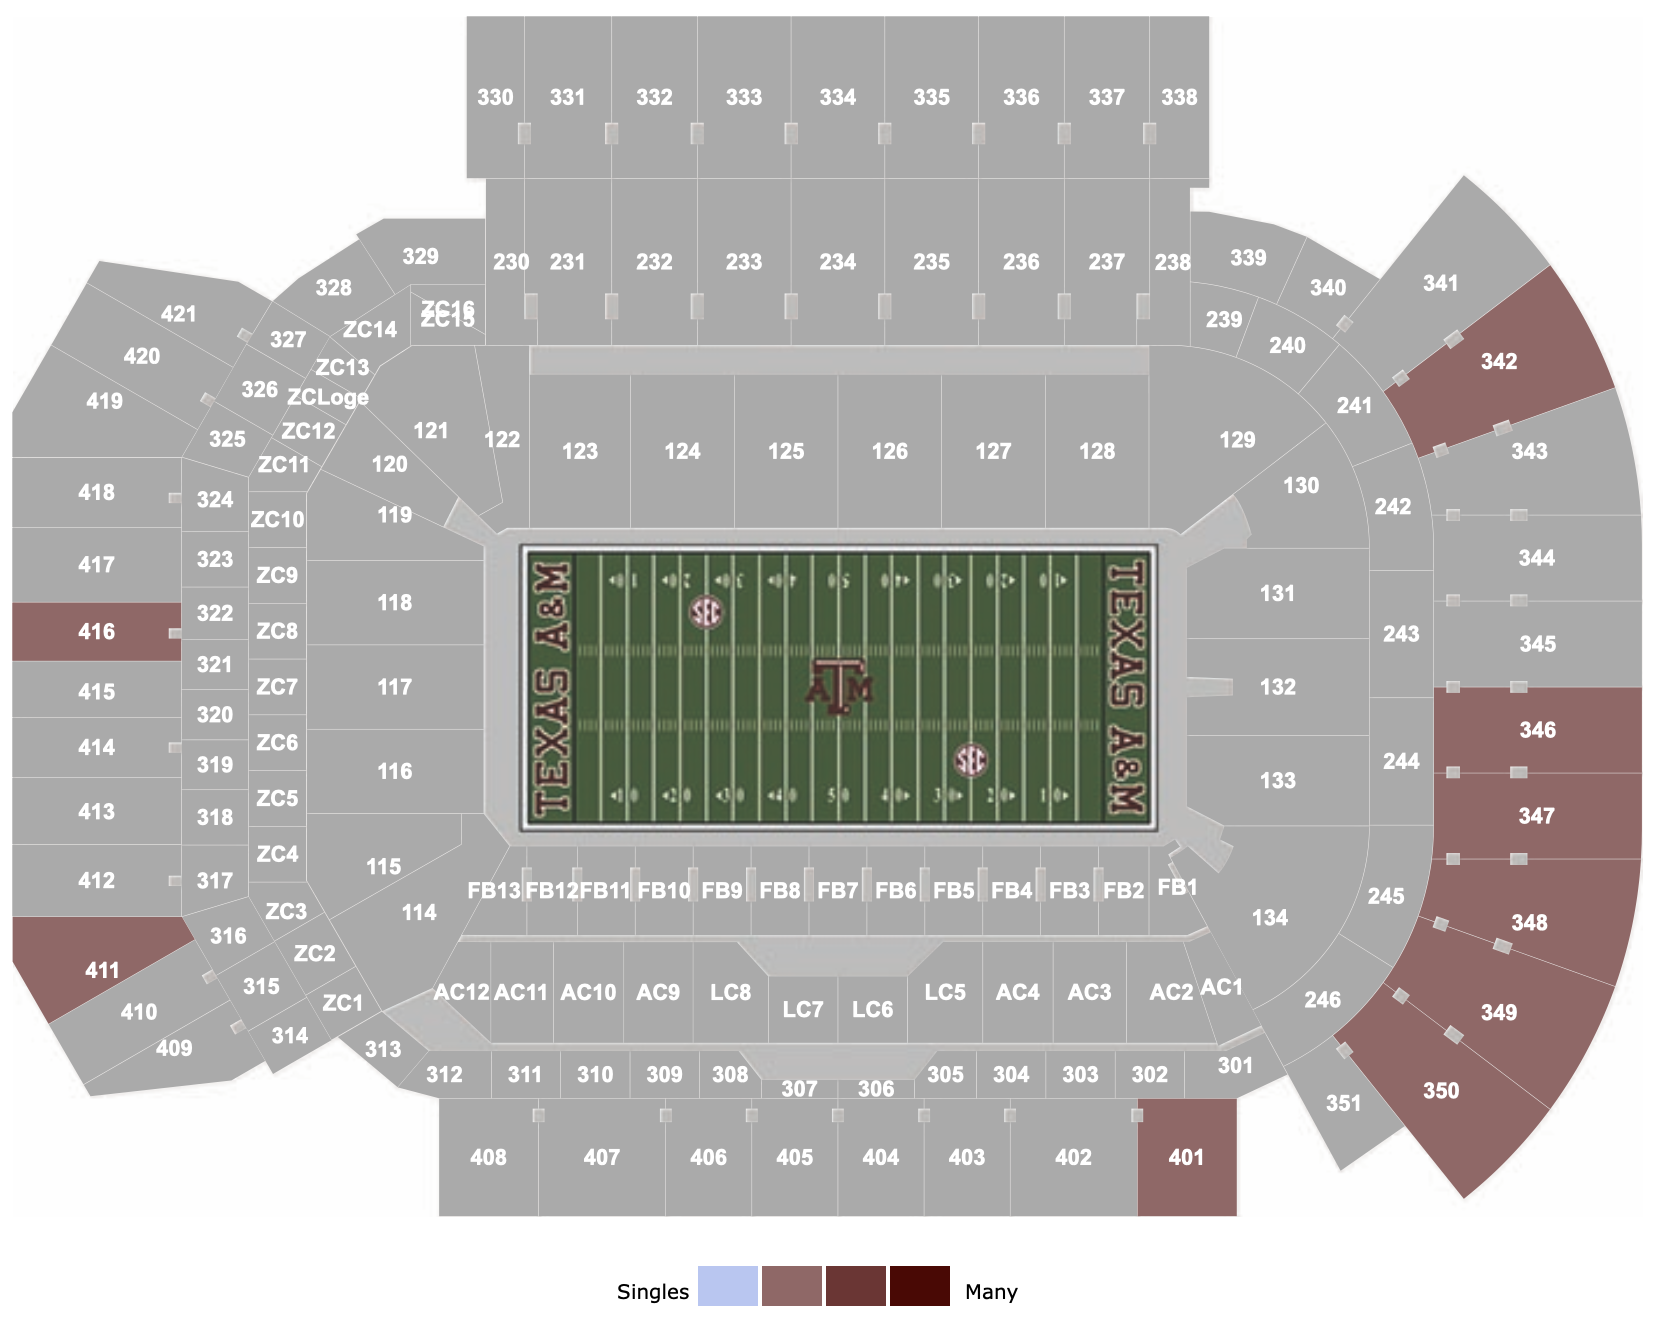 Where To Find The Cheapest Tickets See Texas A M Vs South Carolina On 11 16 19